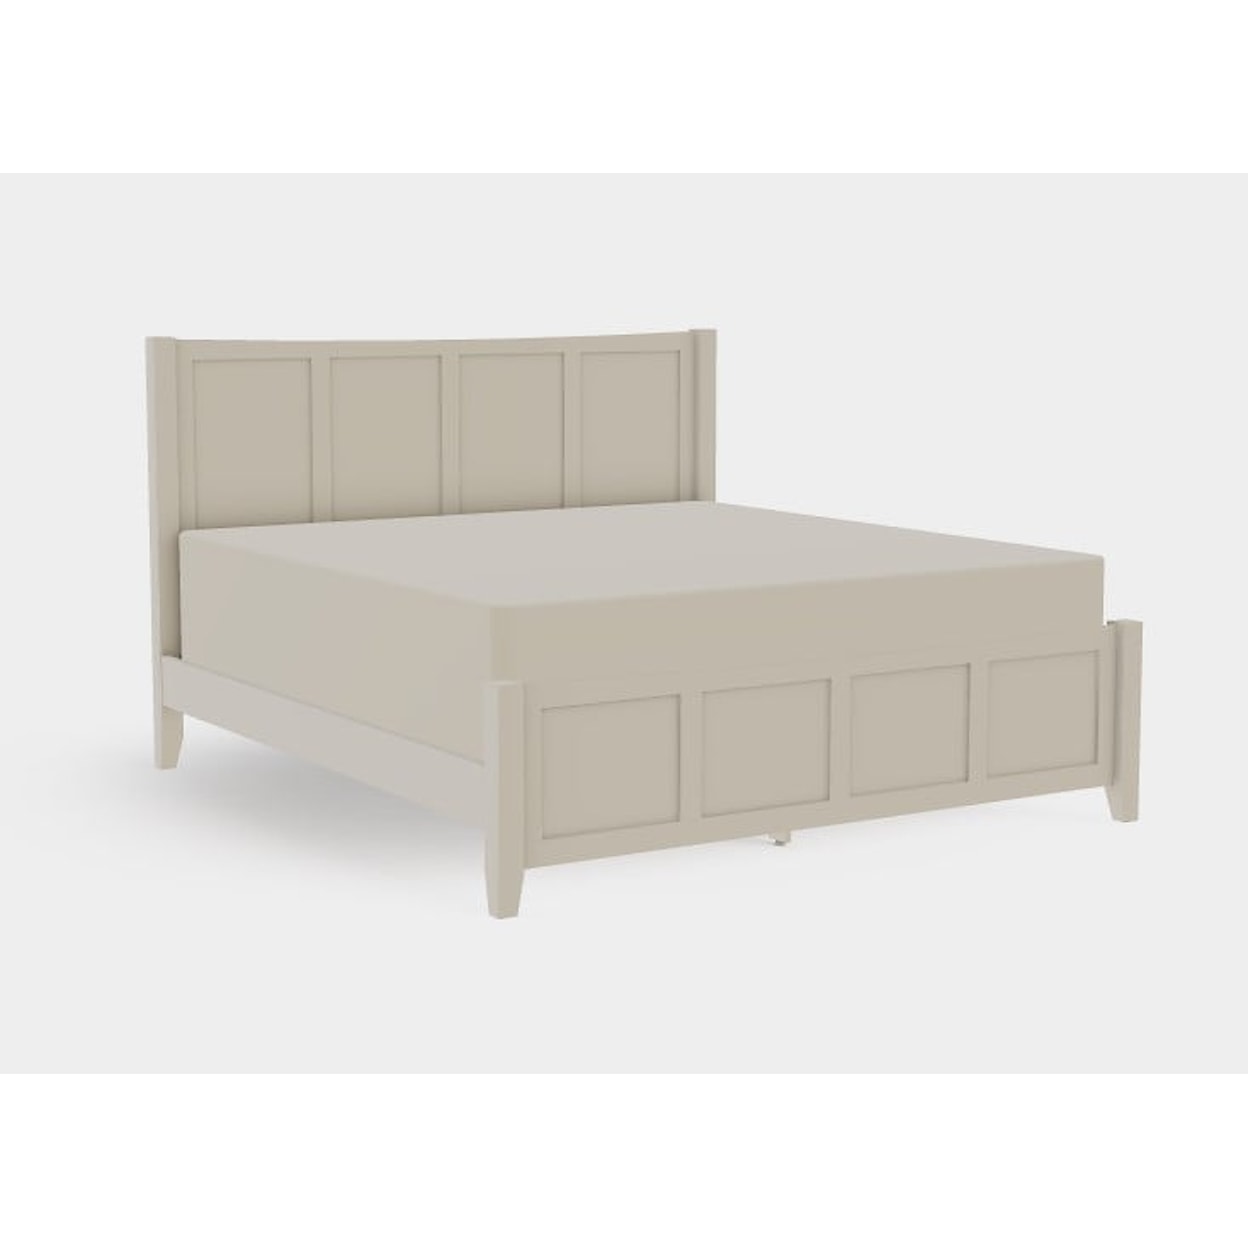 Mavin Atwood Group Atwood King Low Footboard Panel Bed